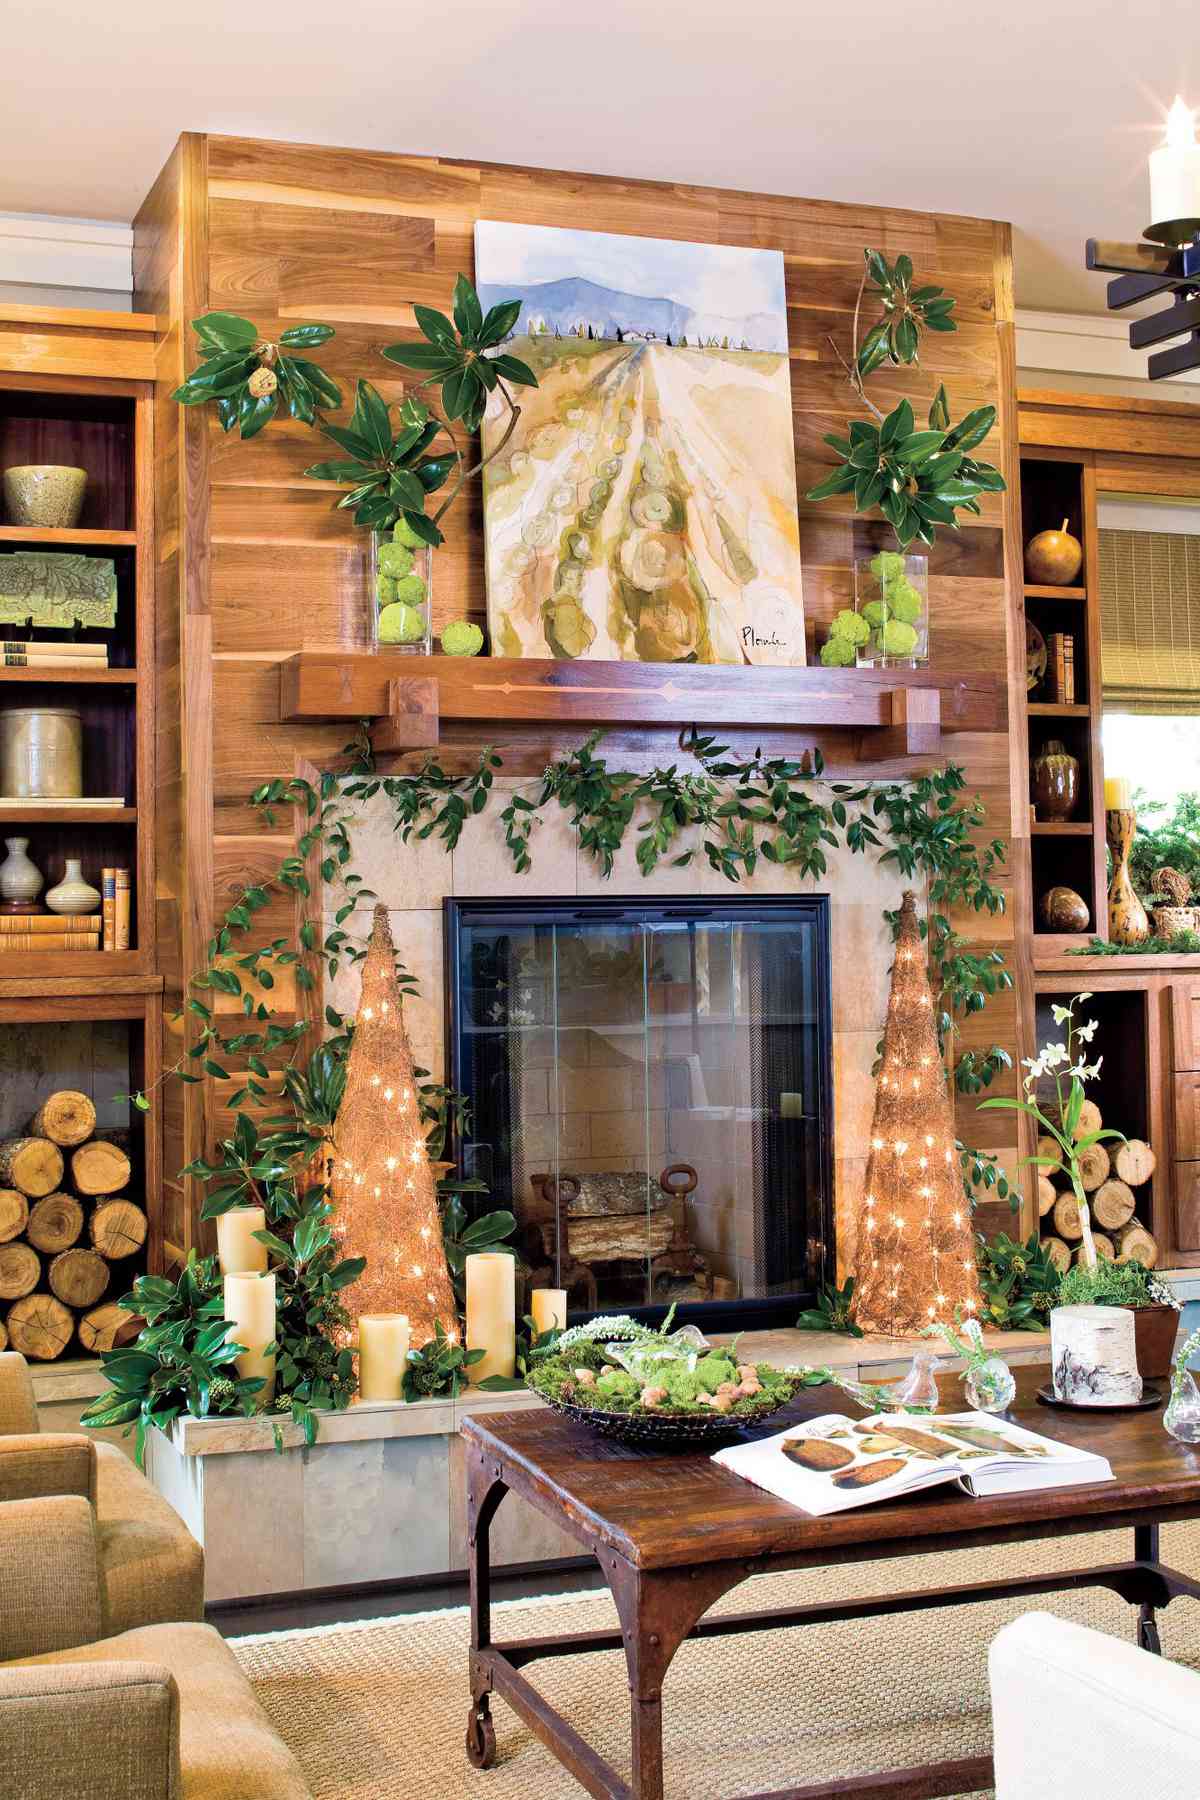 8 Rustic Cottage-Inspired Christmas Decor Ideas for Your Home ...